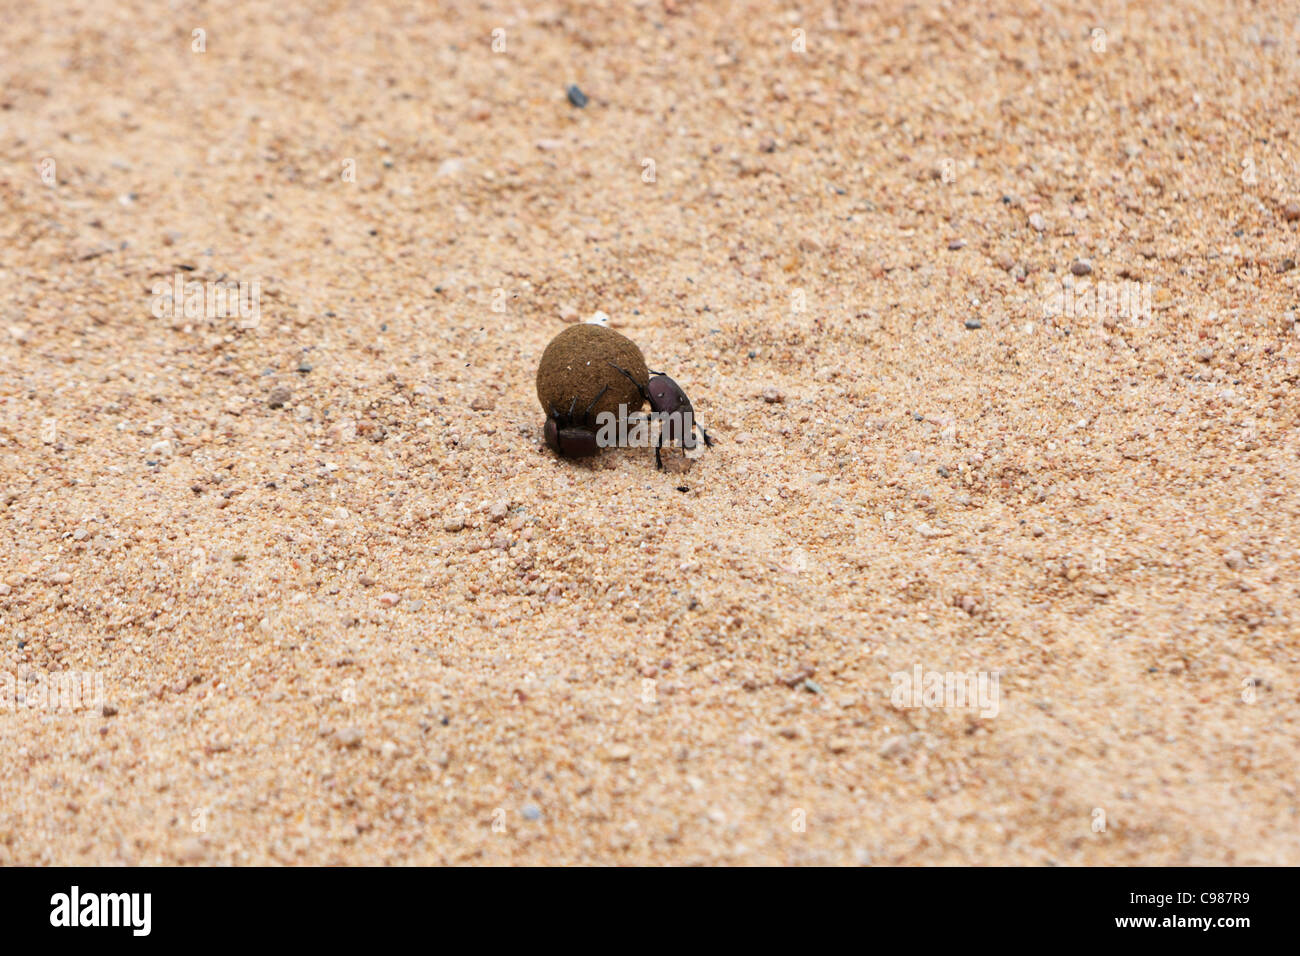 Dung beetles (Scarabaeidae coprinae) male pushing, female on the side roll their collected dung ball. Stock Photo